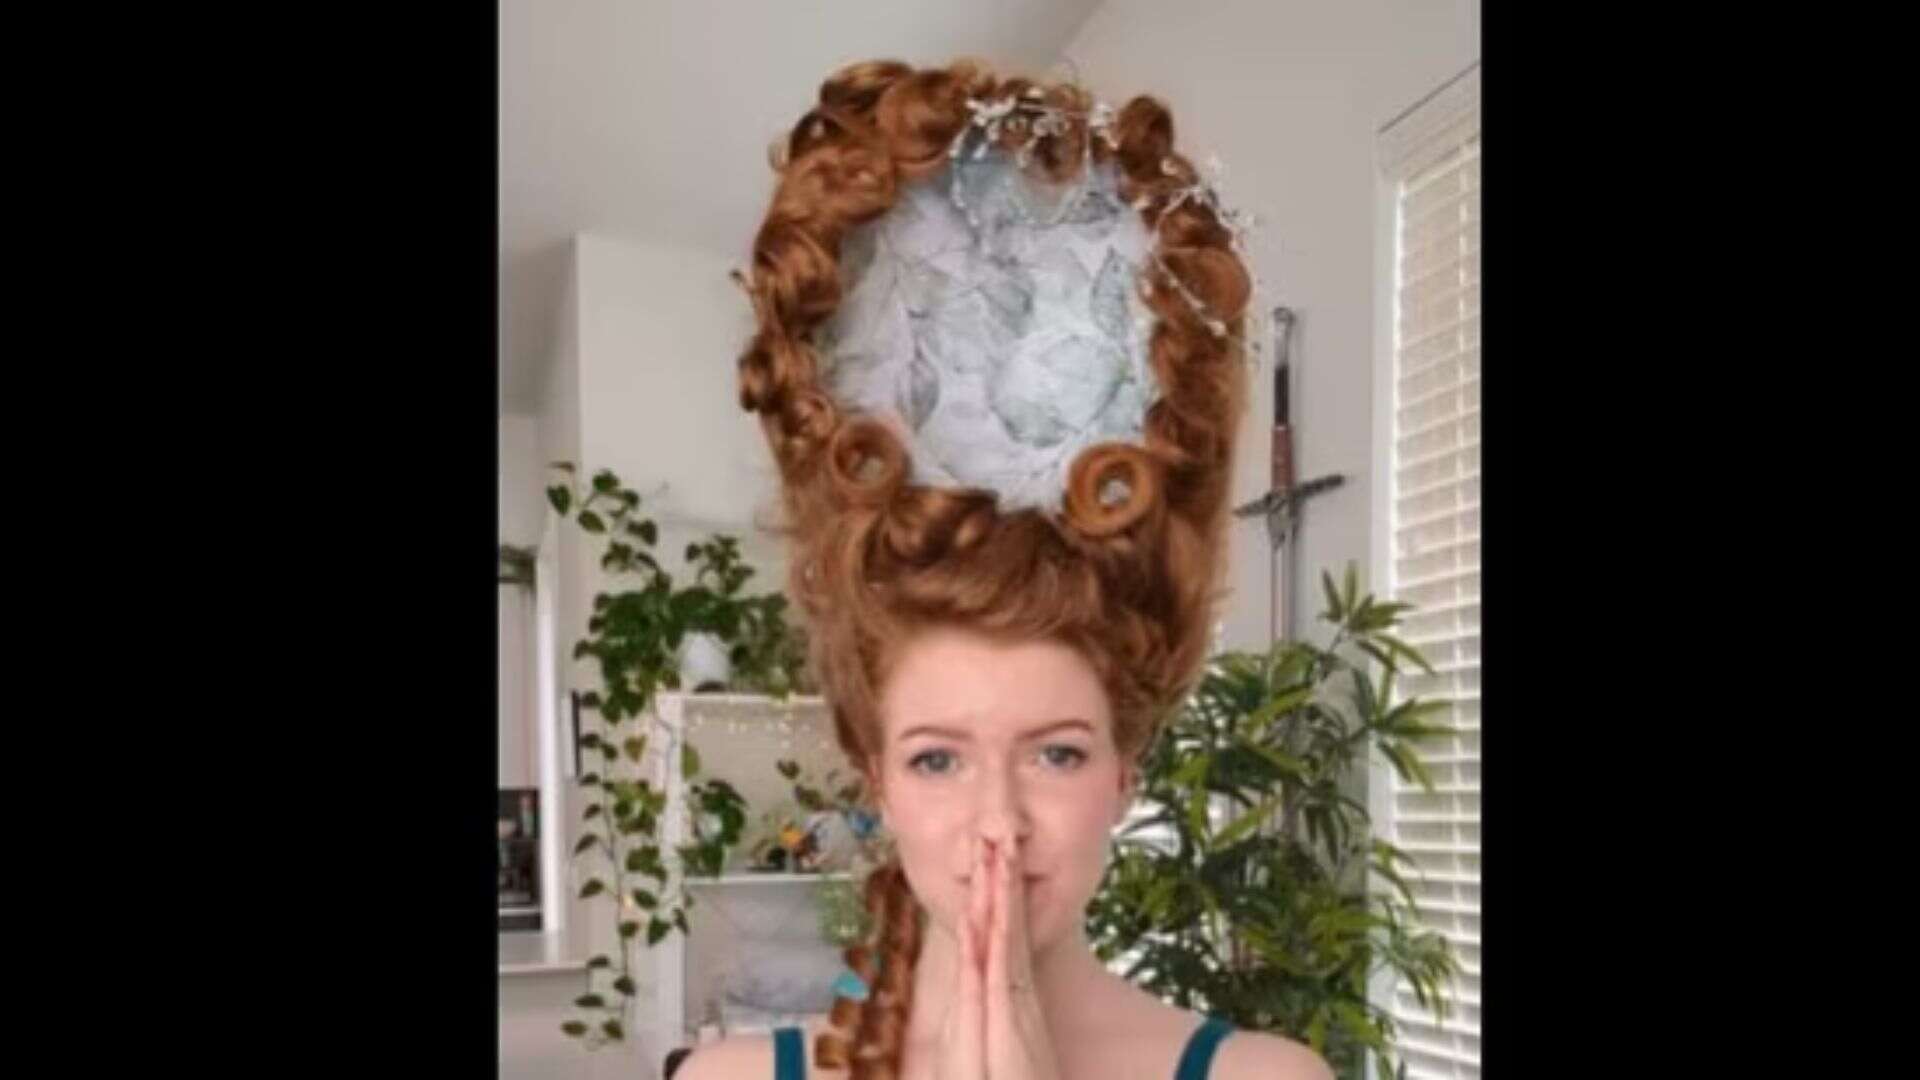 Artist Recreates Queen Charlotte’s Iconic Wig From Bridgerton Using Her Own Hair, Video Goes Viral